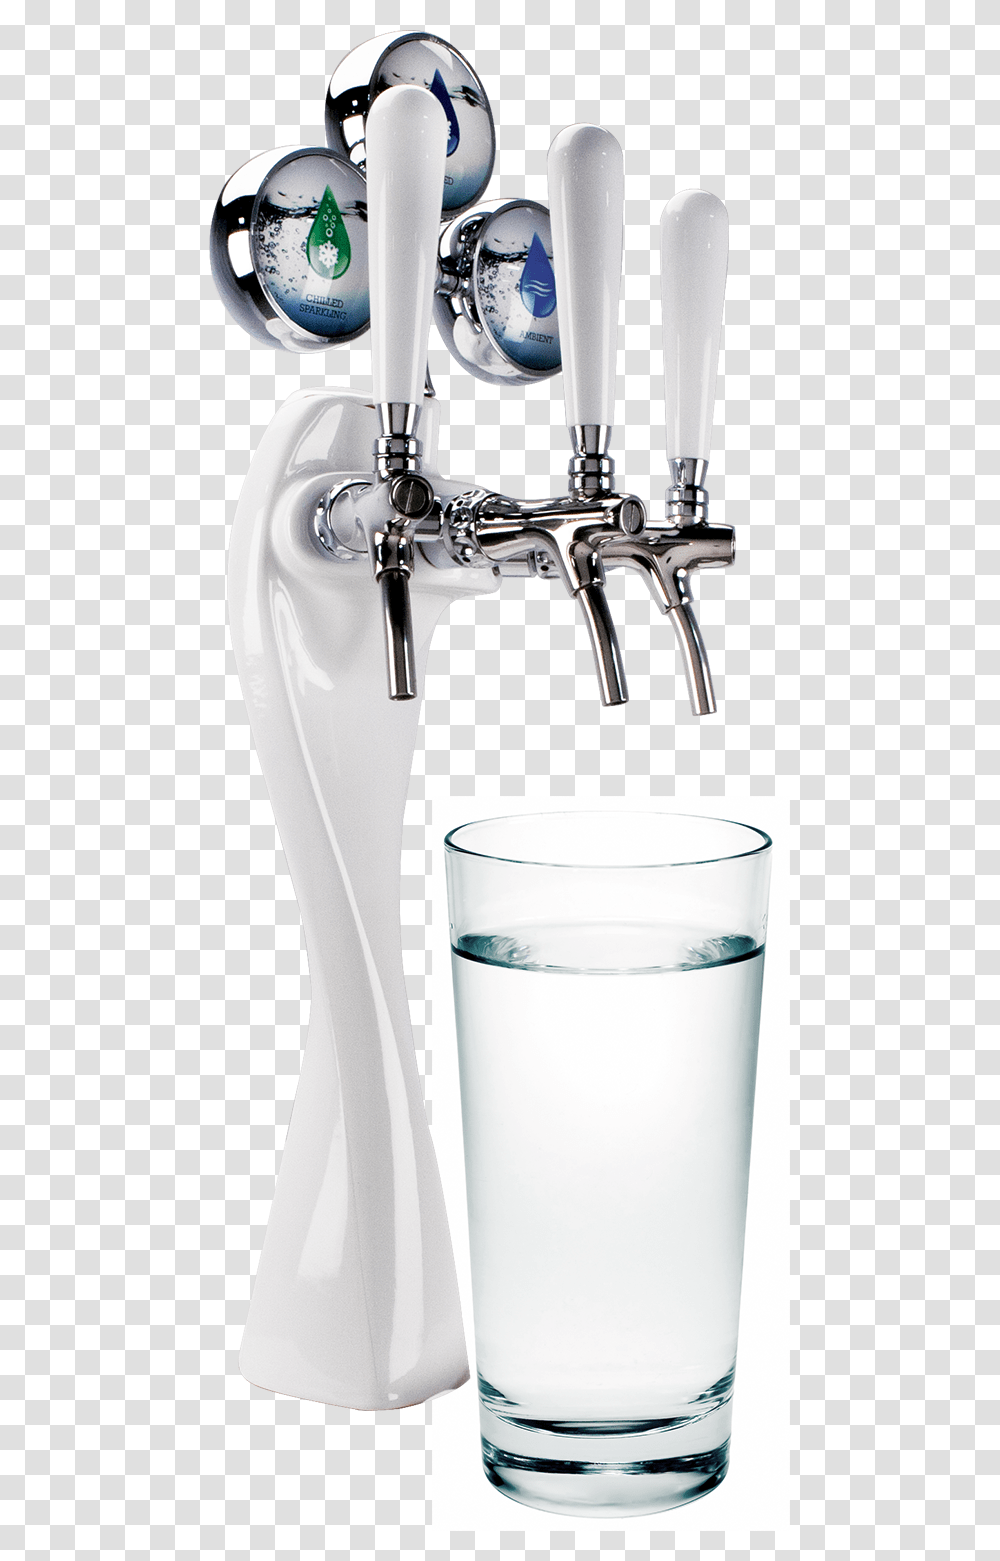 Cup Of Water, Indoors, Tap, Sink Faucet, Wristwatch Transparent Png